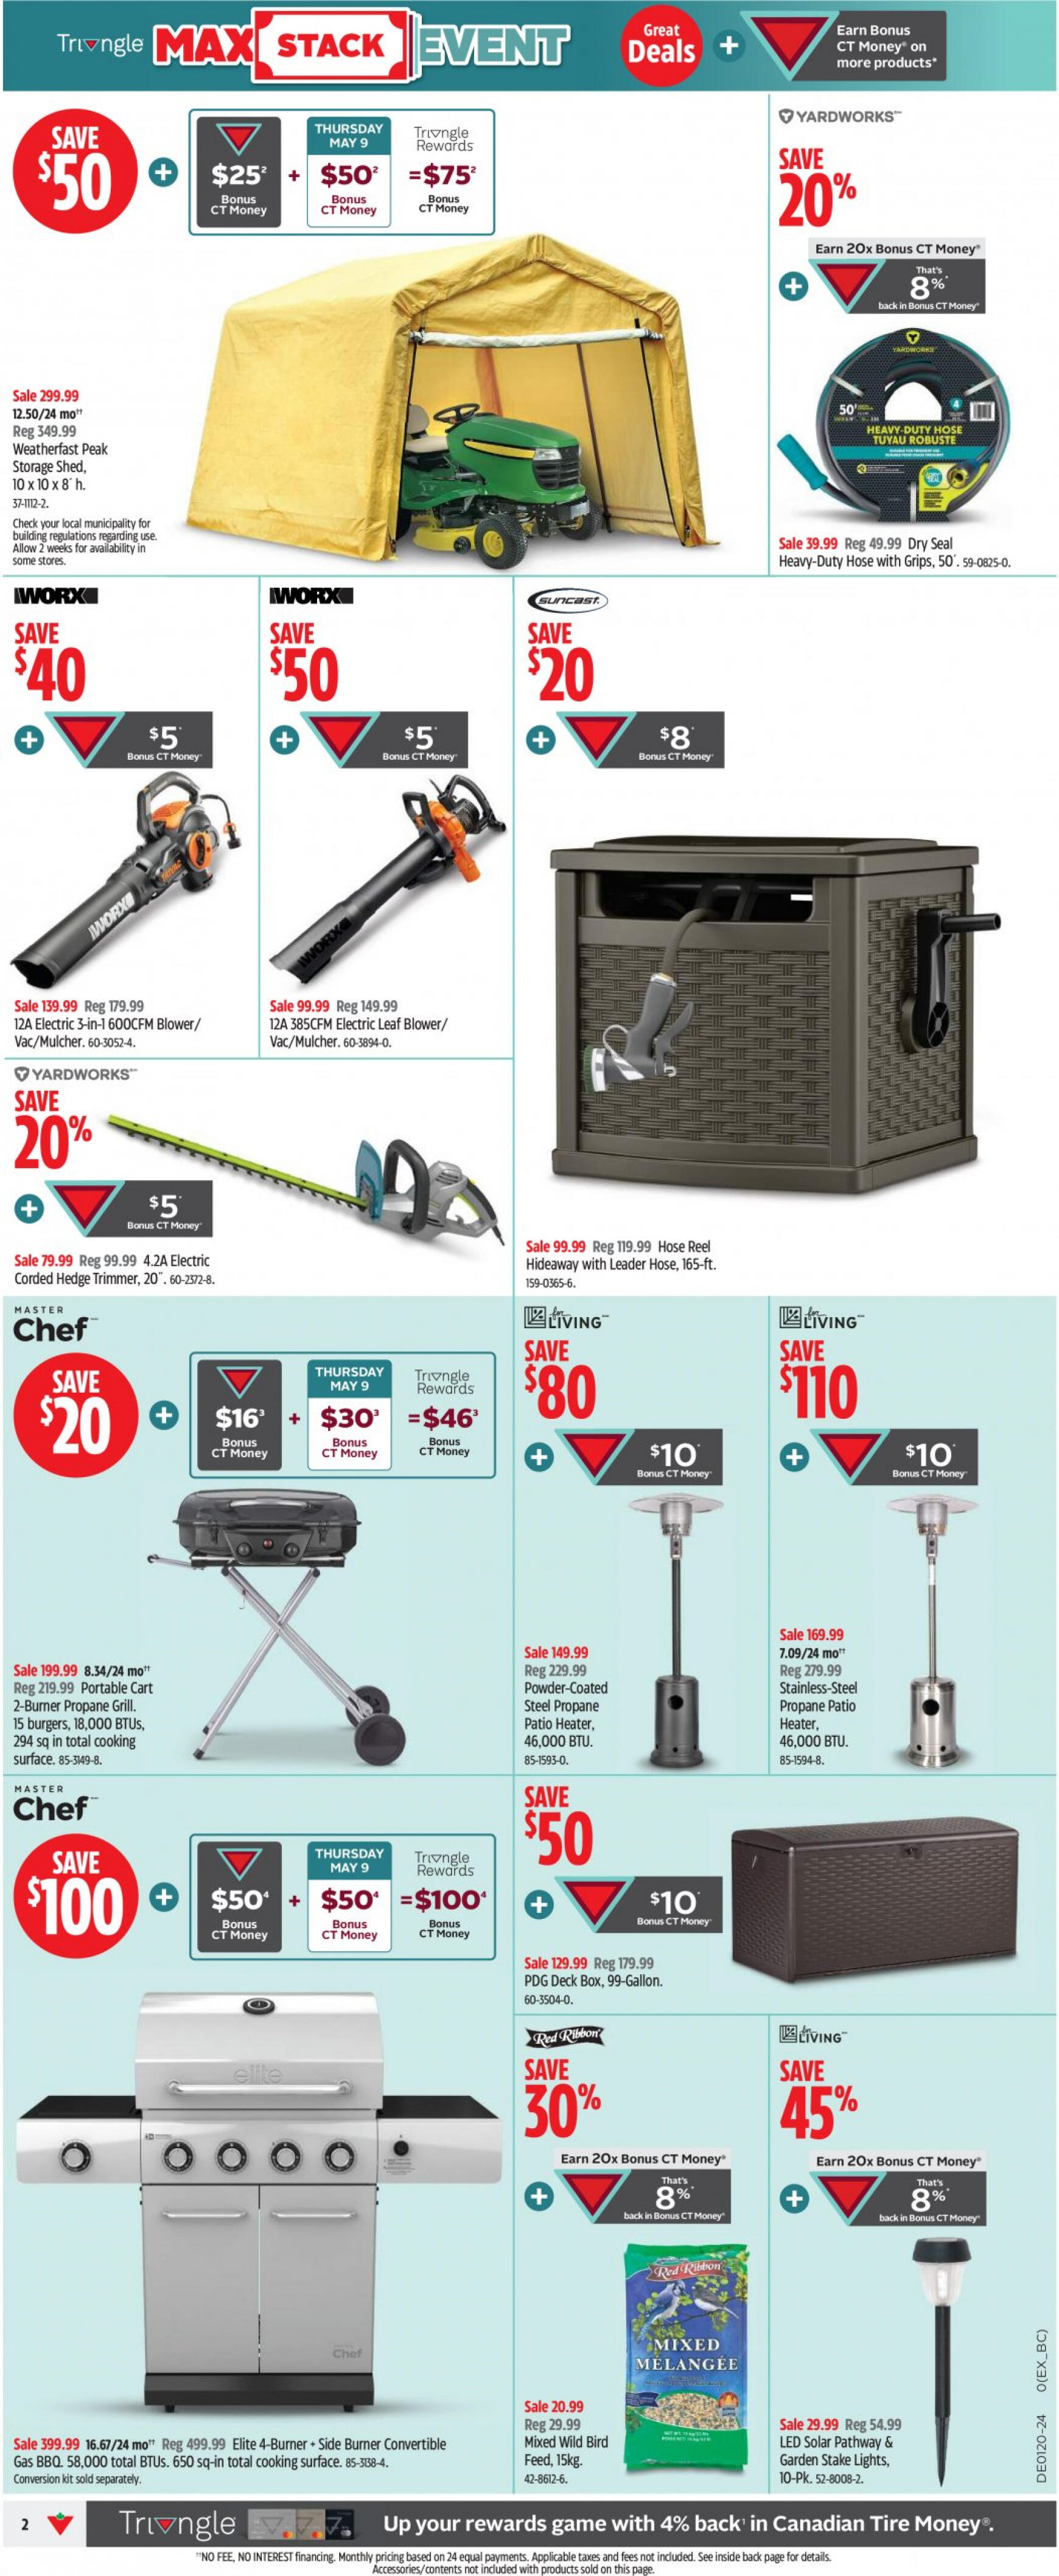 canadian-tire - Canadian Tire flyer current 09.05. - 15.05. - page: 2